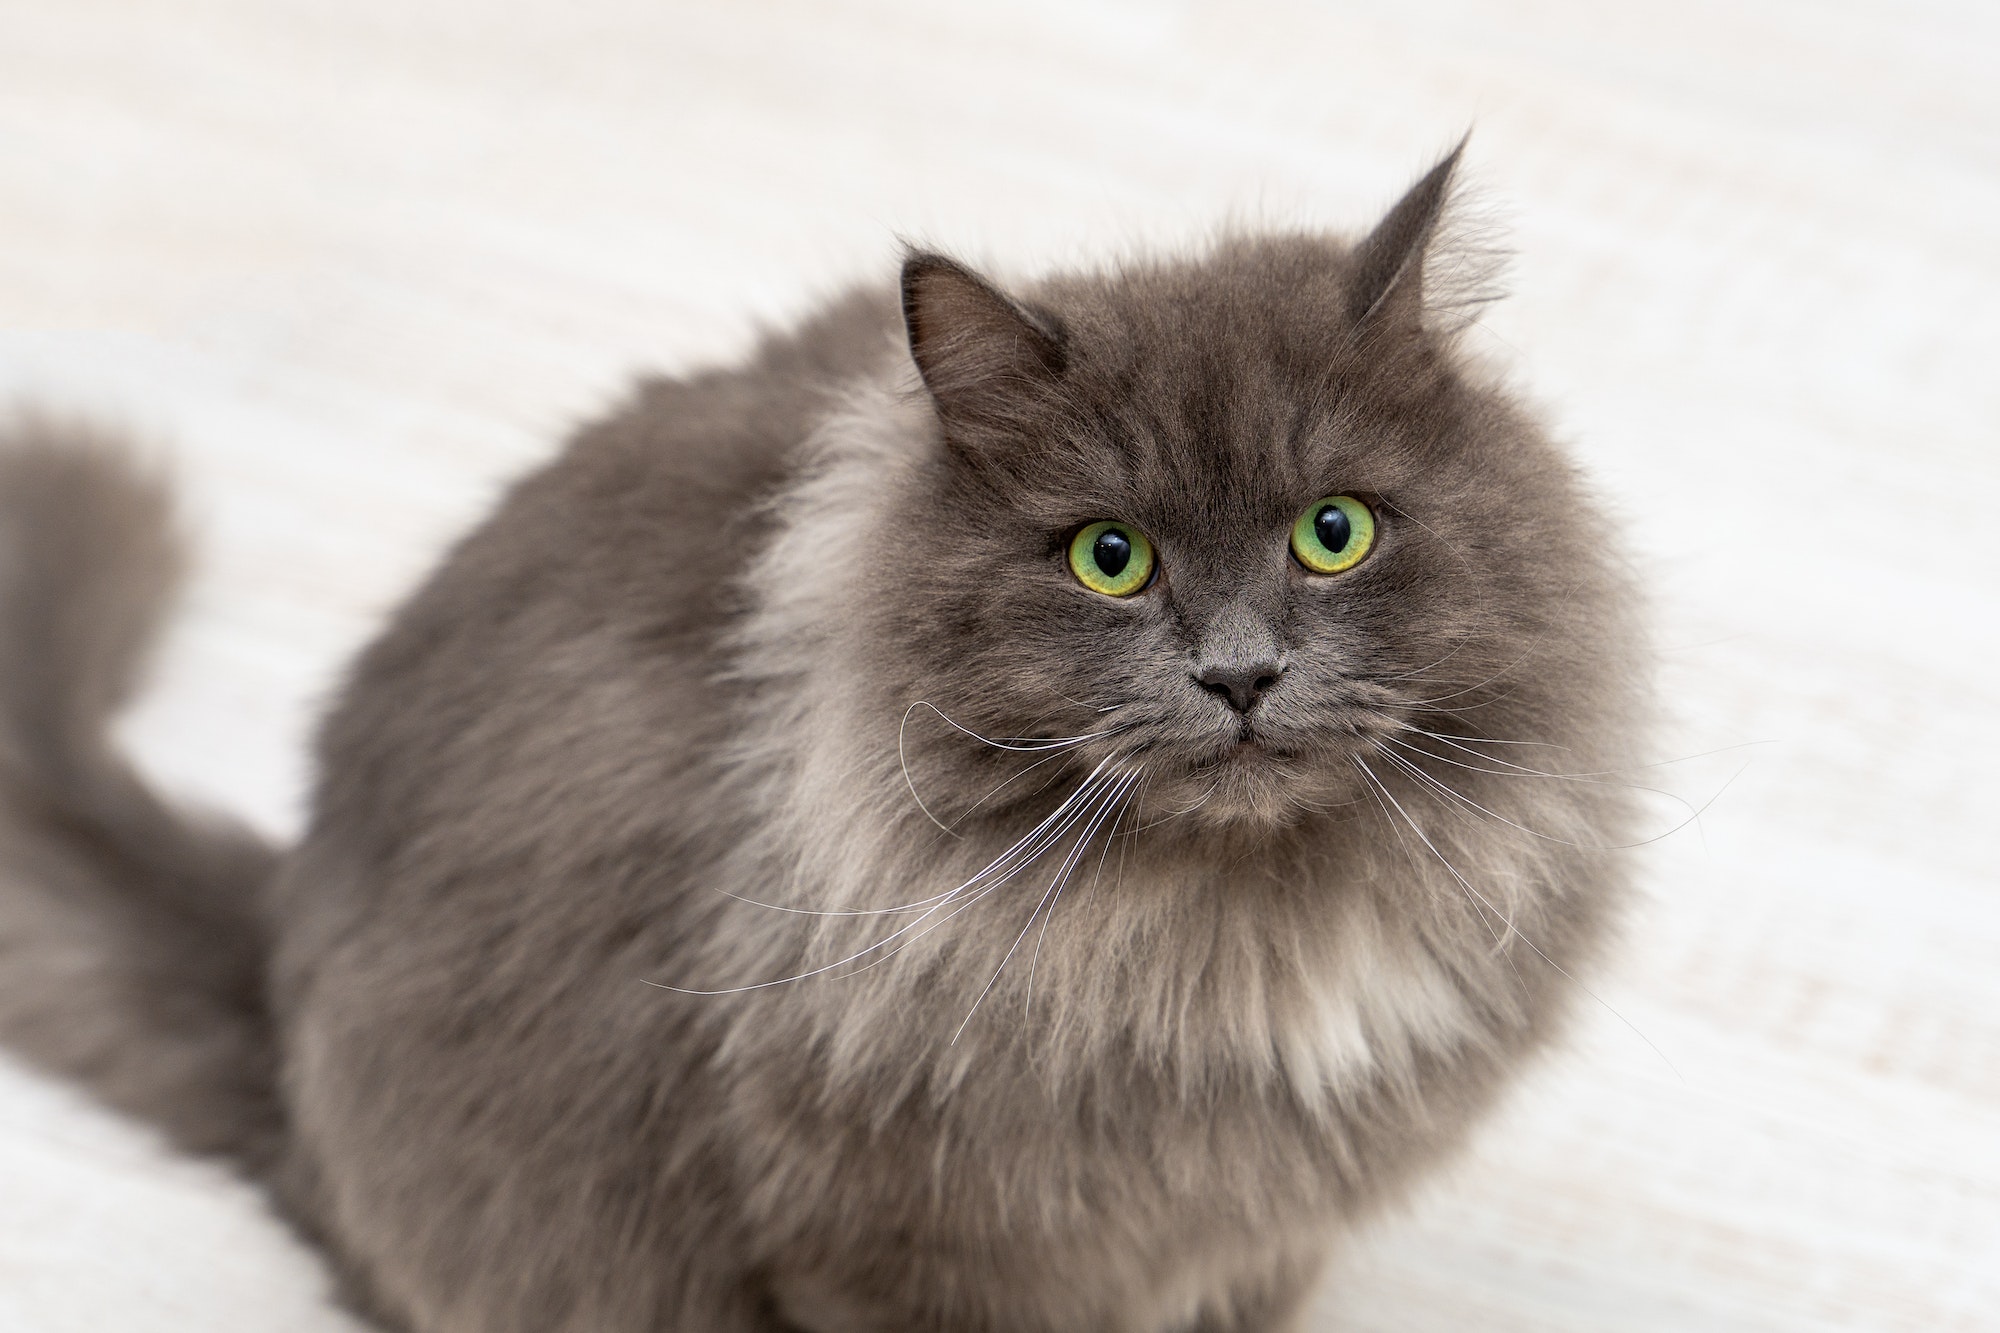 Front view of a rare Nebelung cat with green eyes looking into camera.